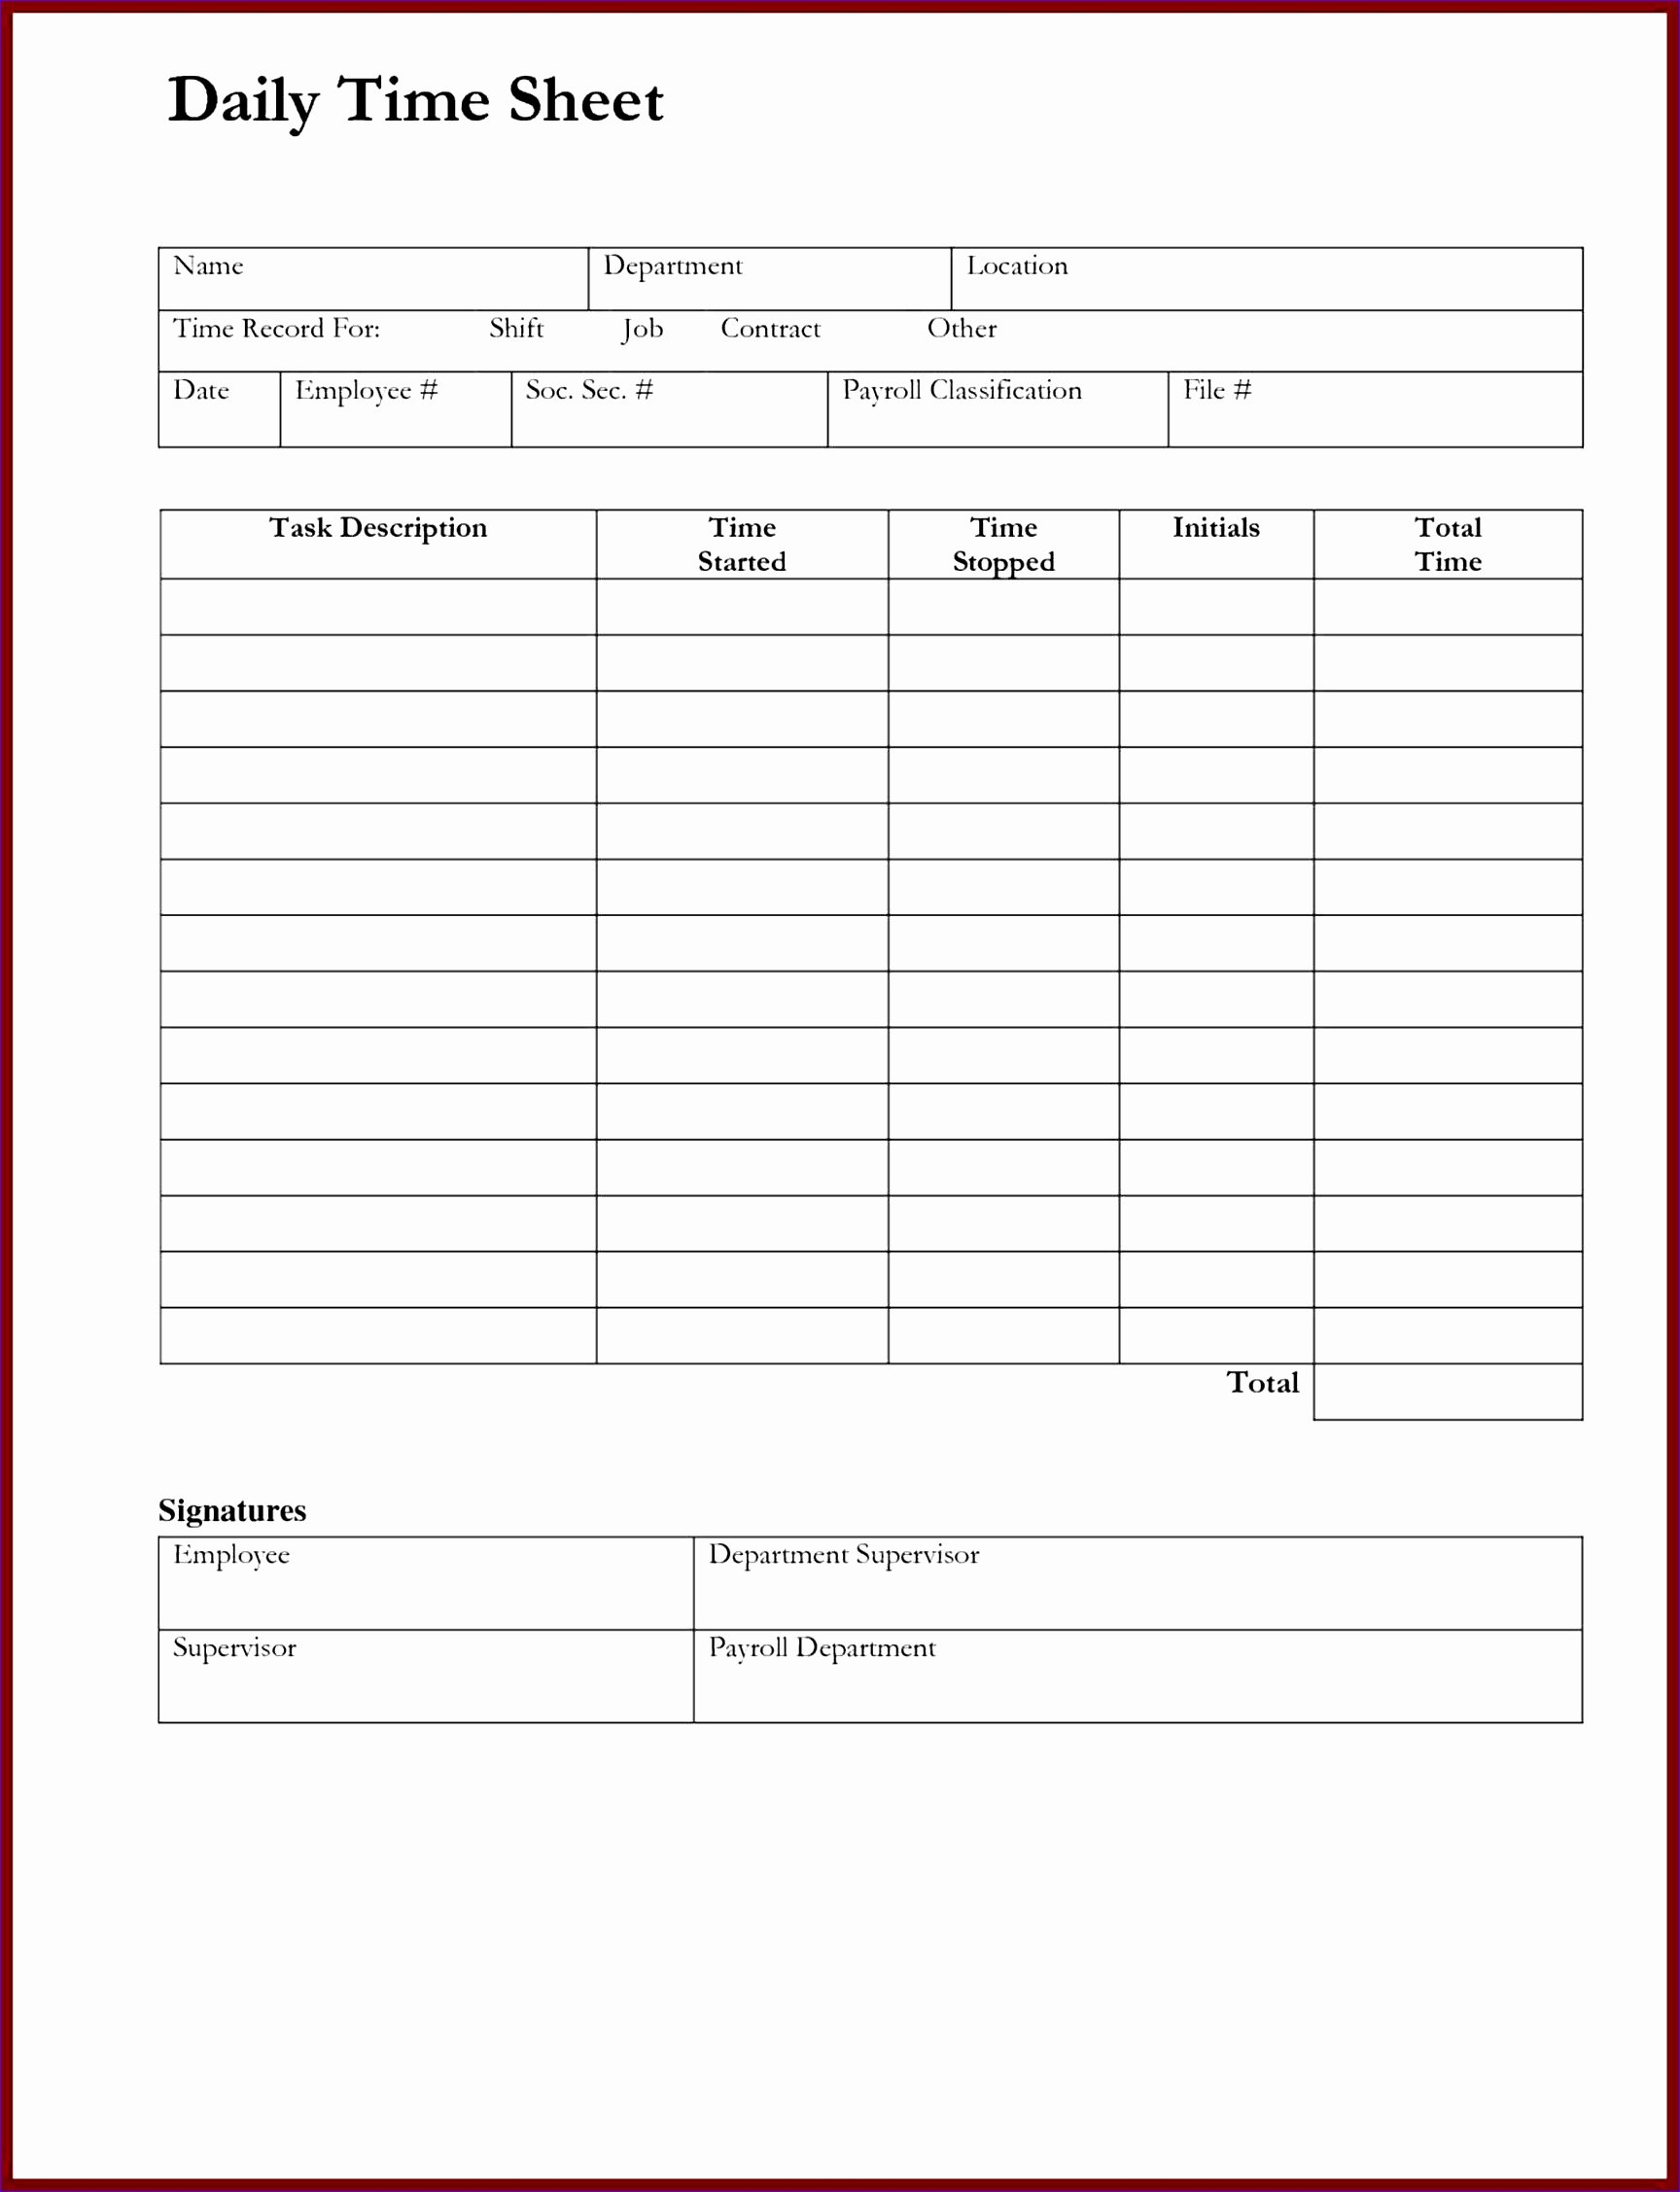 Timesheet Invoice Template Excel Inspirational 10 Timesheet Calculator Excel Template Exceltemplates